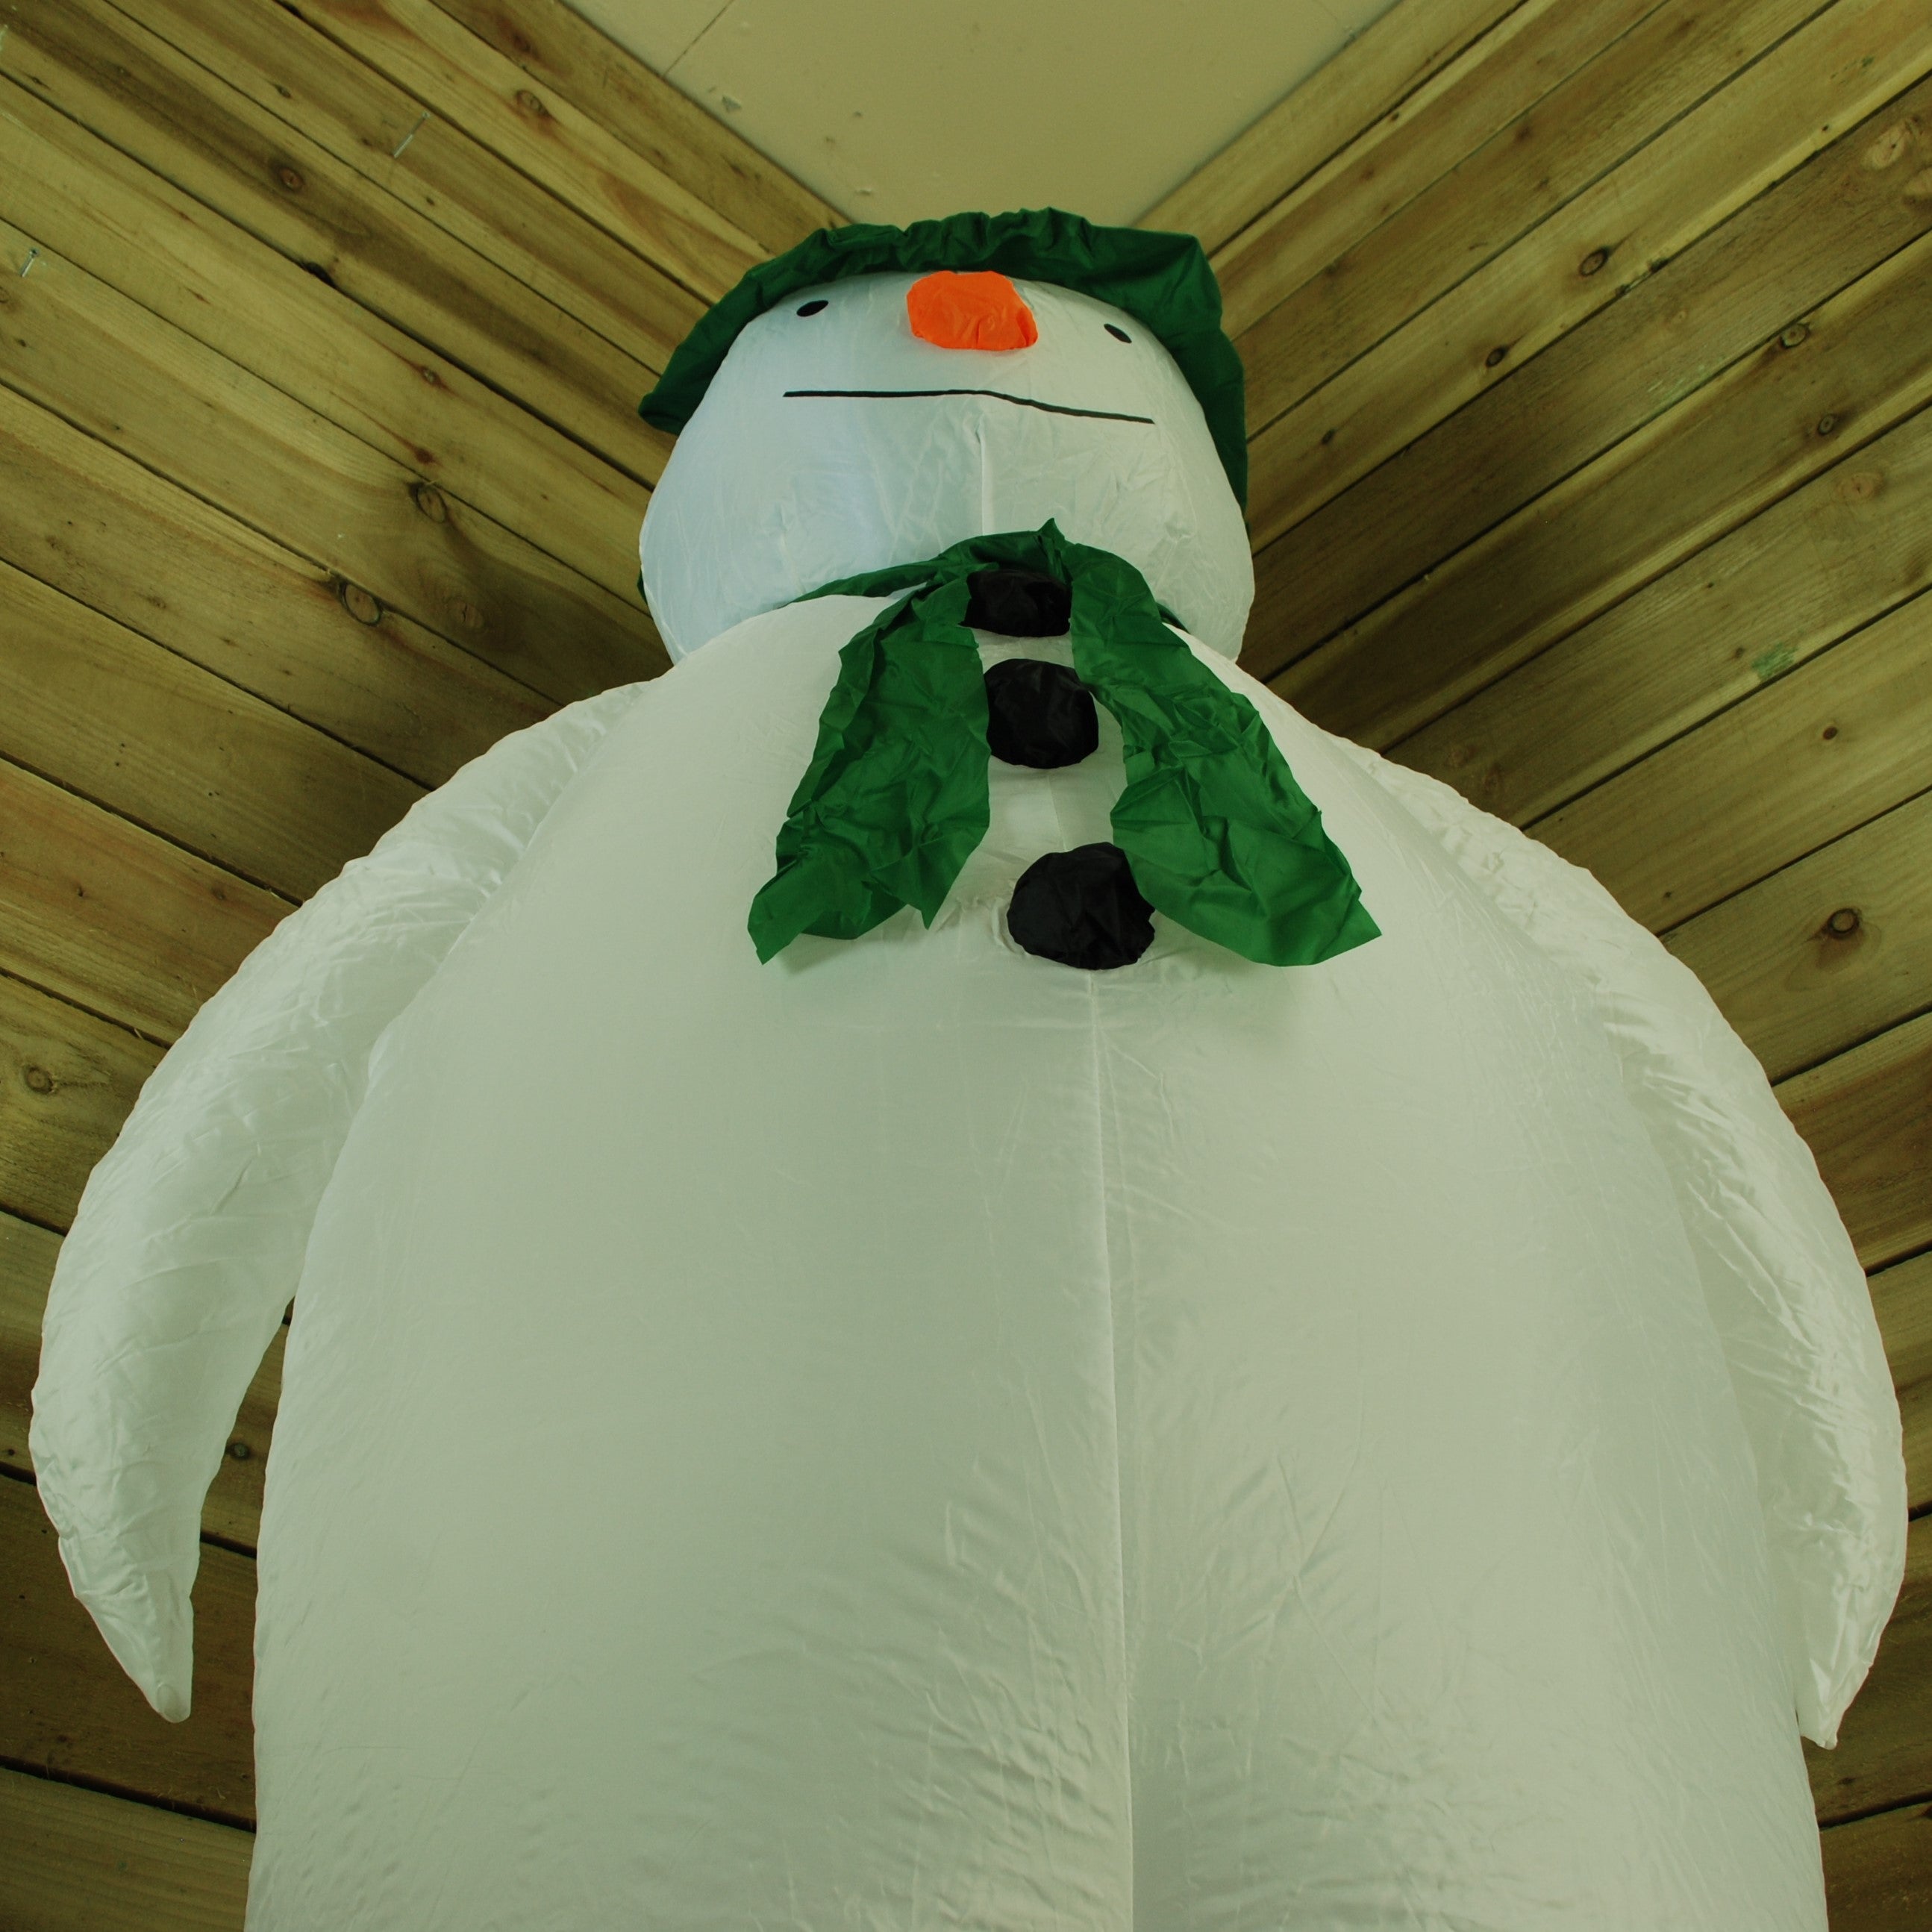 The Snowman 1.8m Inflatable Snowman 6 Ice White LEDs